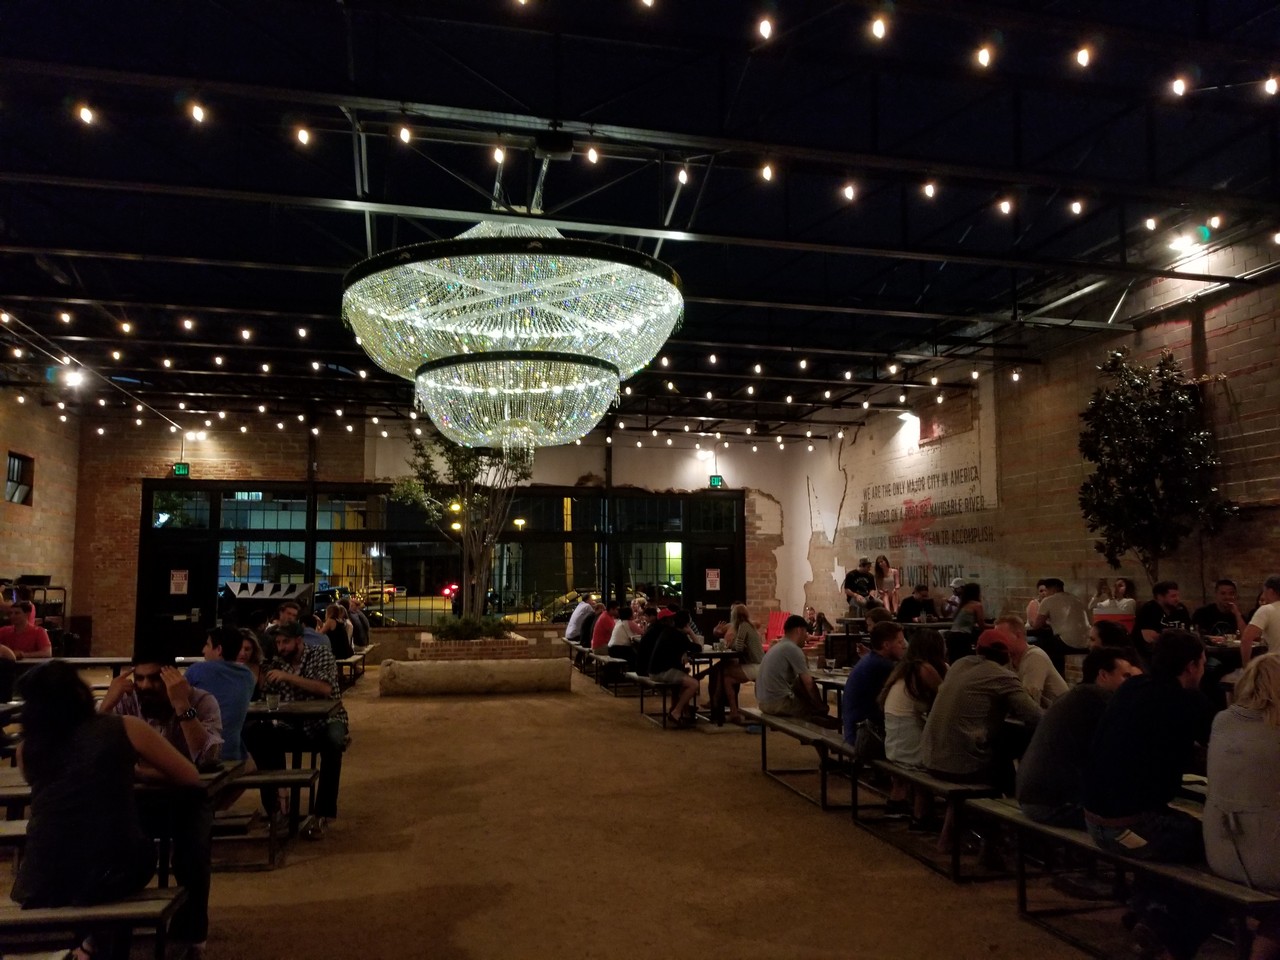 a group of people sitting in benches and a chandelier